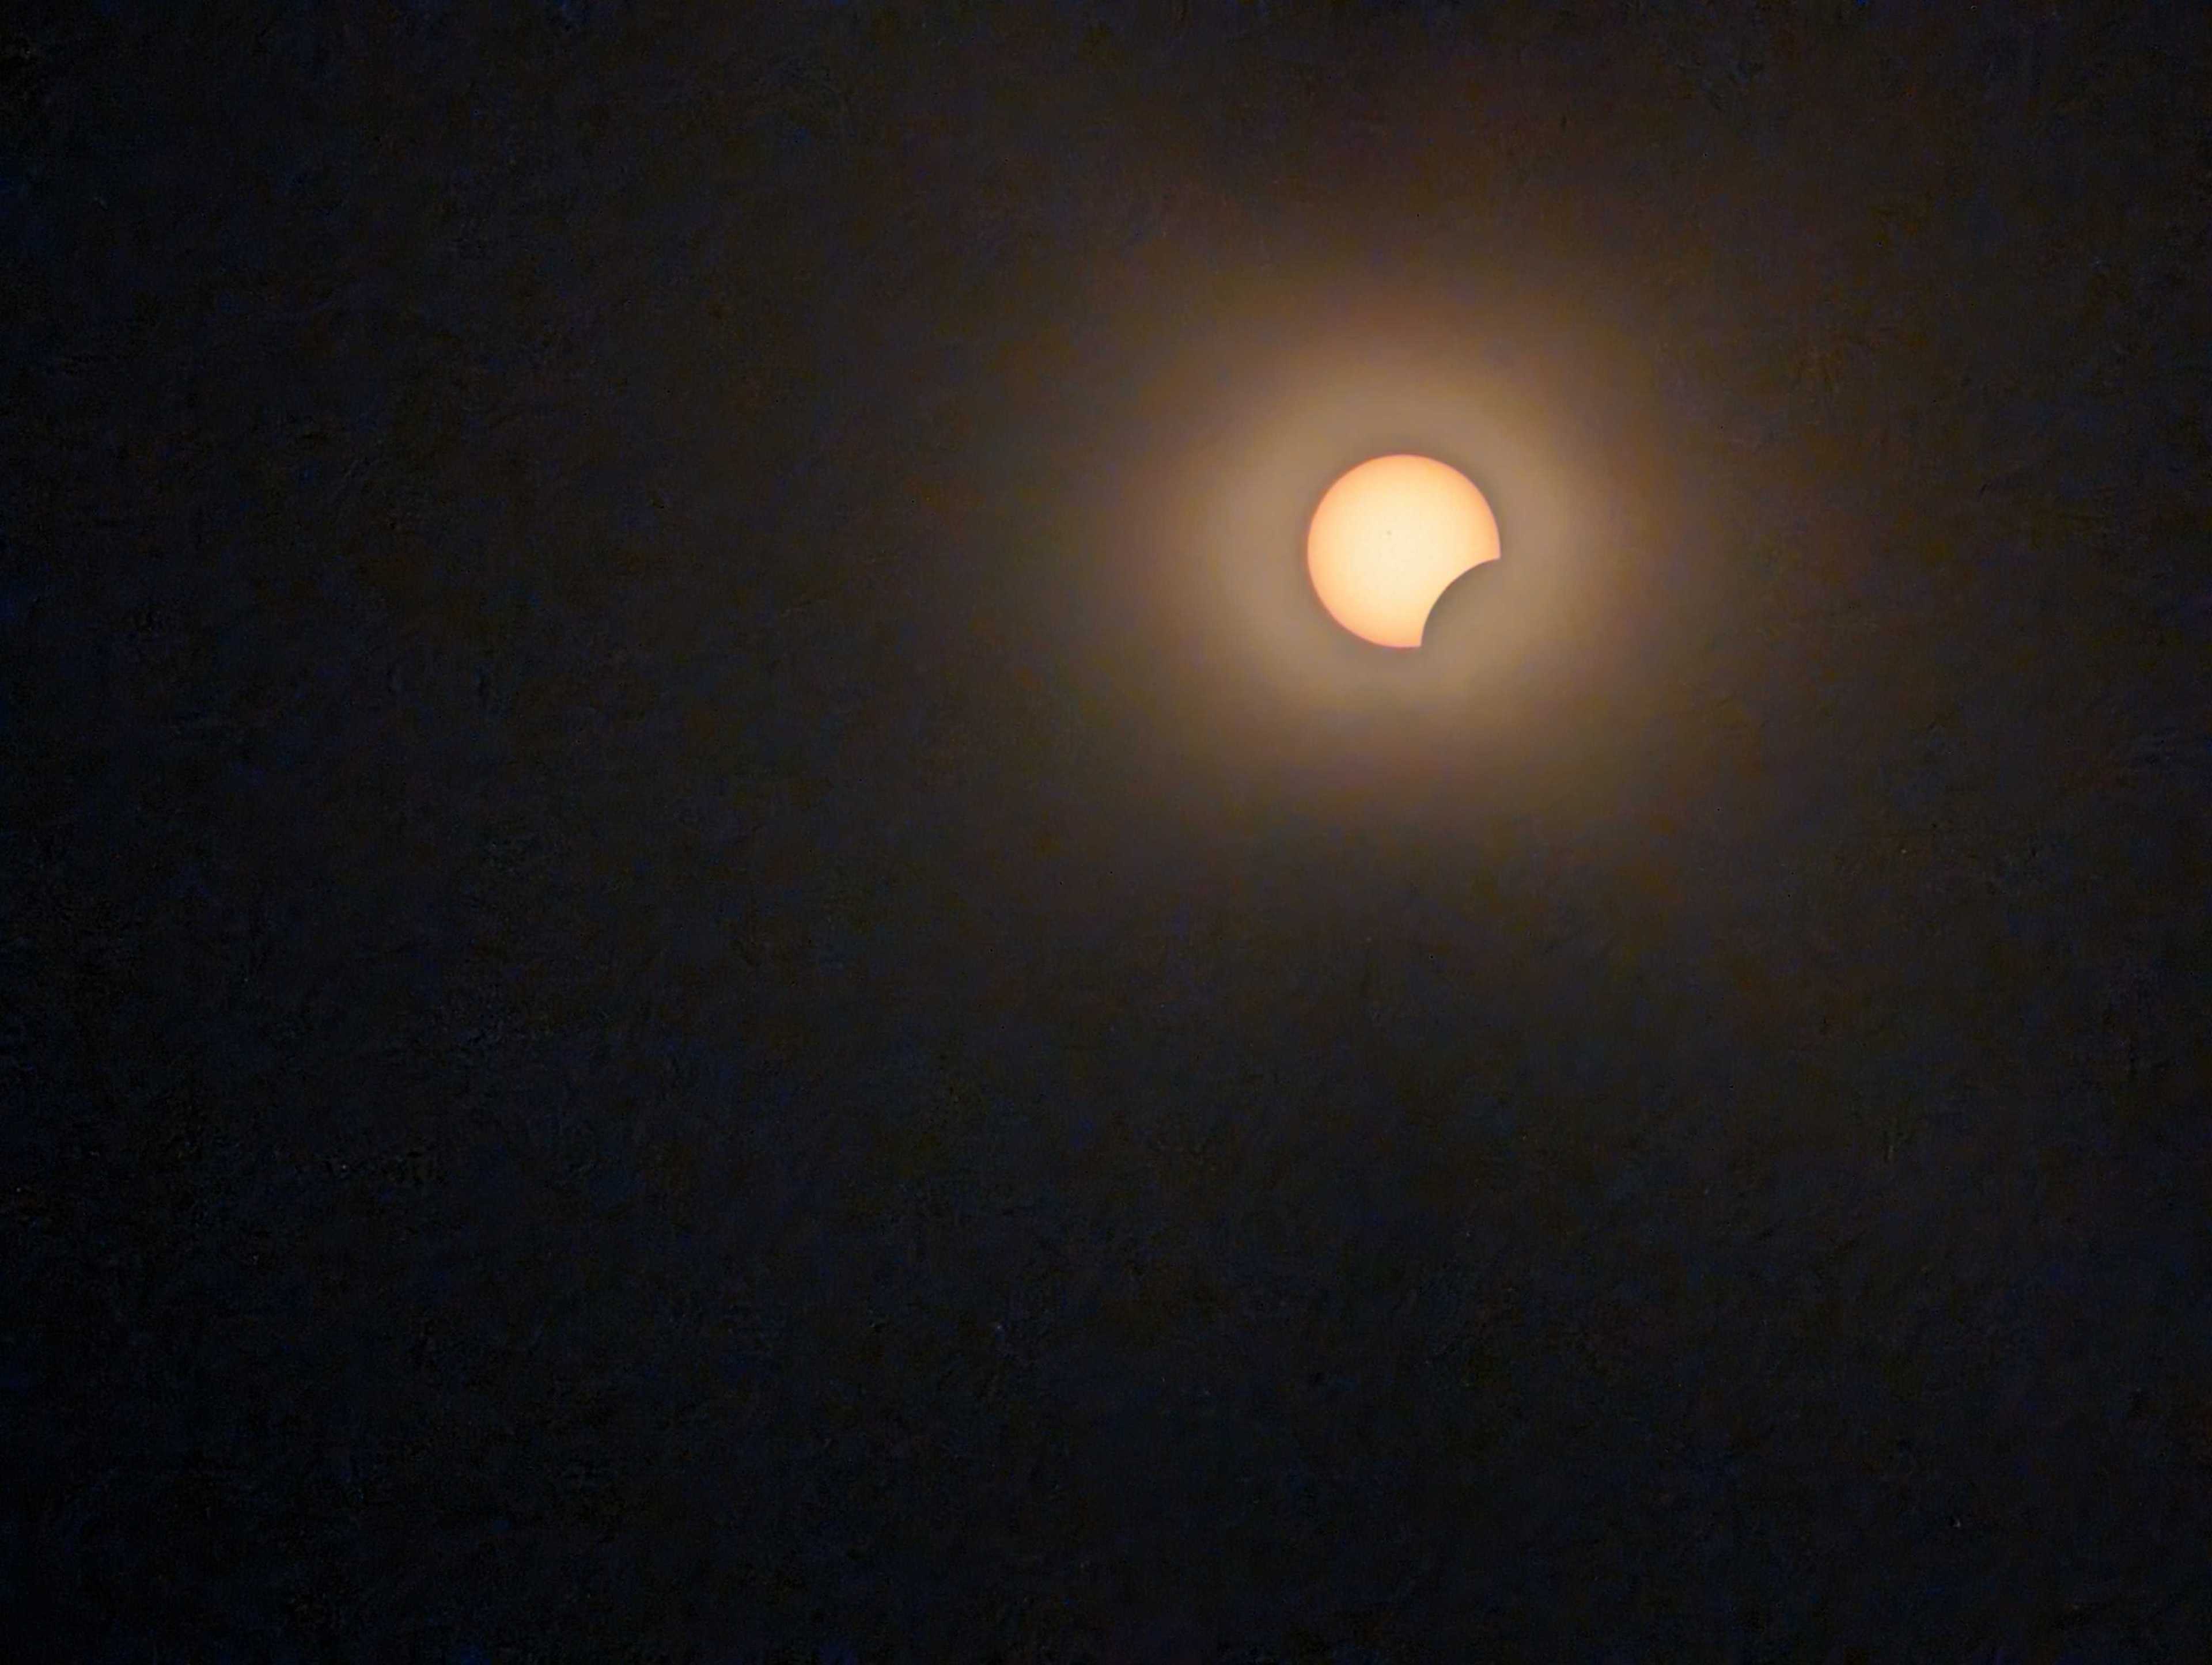 A solar eclipse with the sun partially obscured by the moon, against a dark sky.